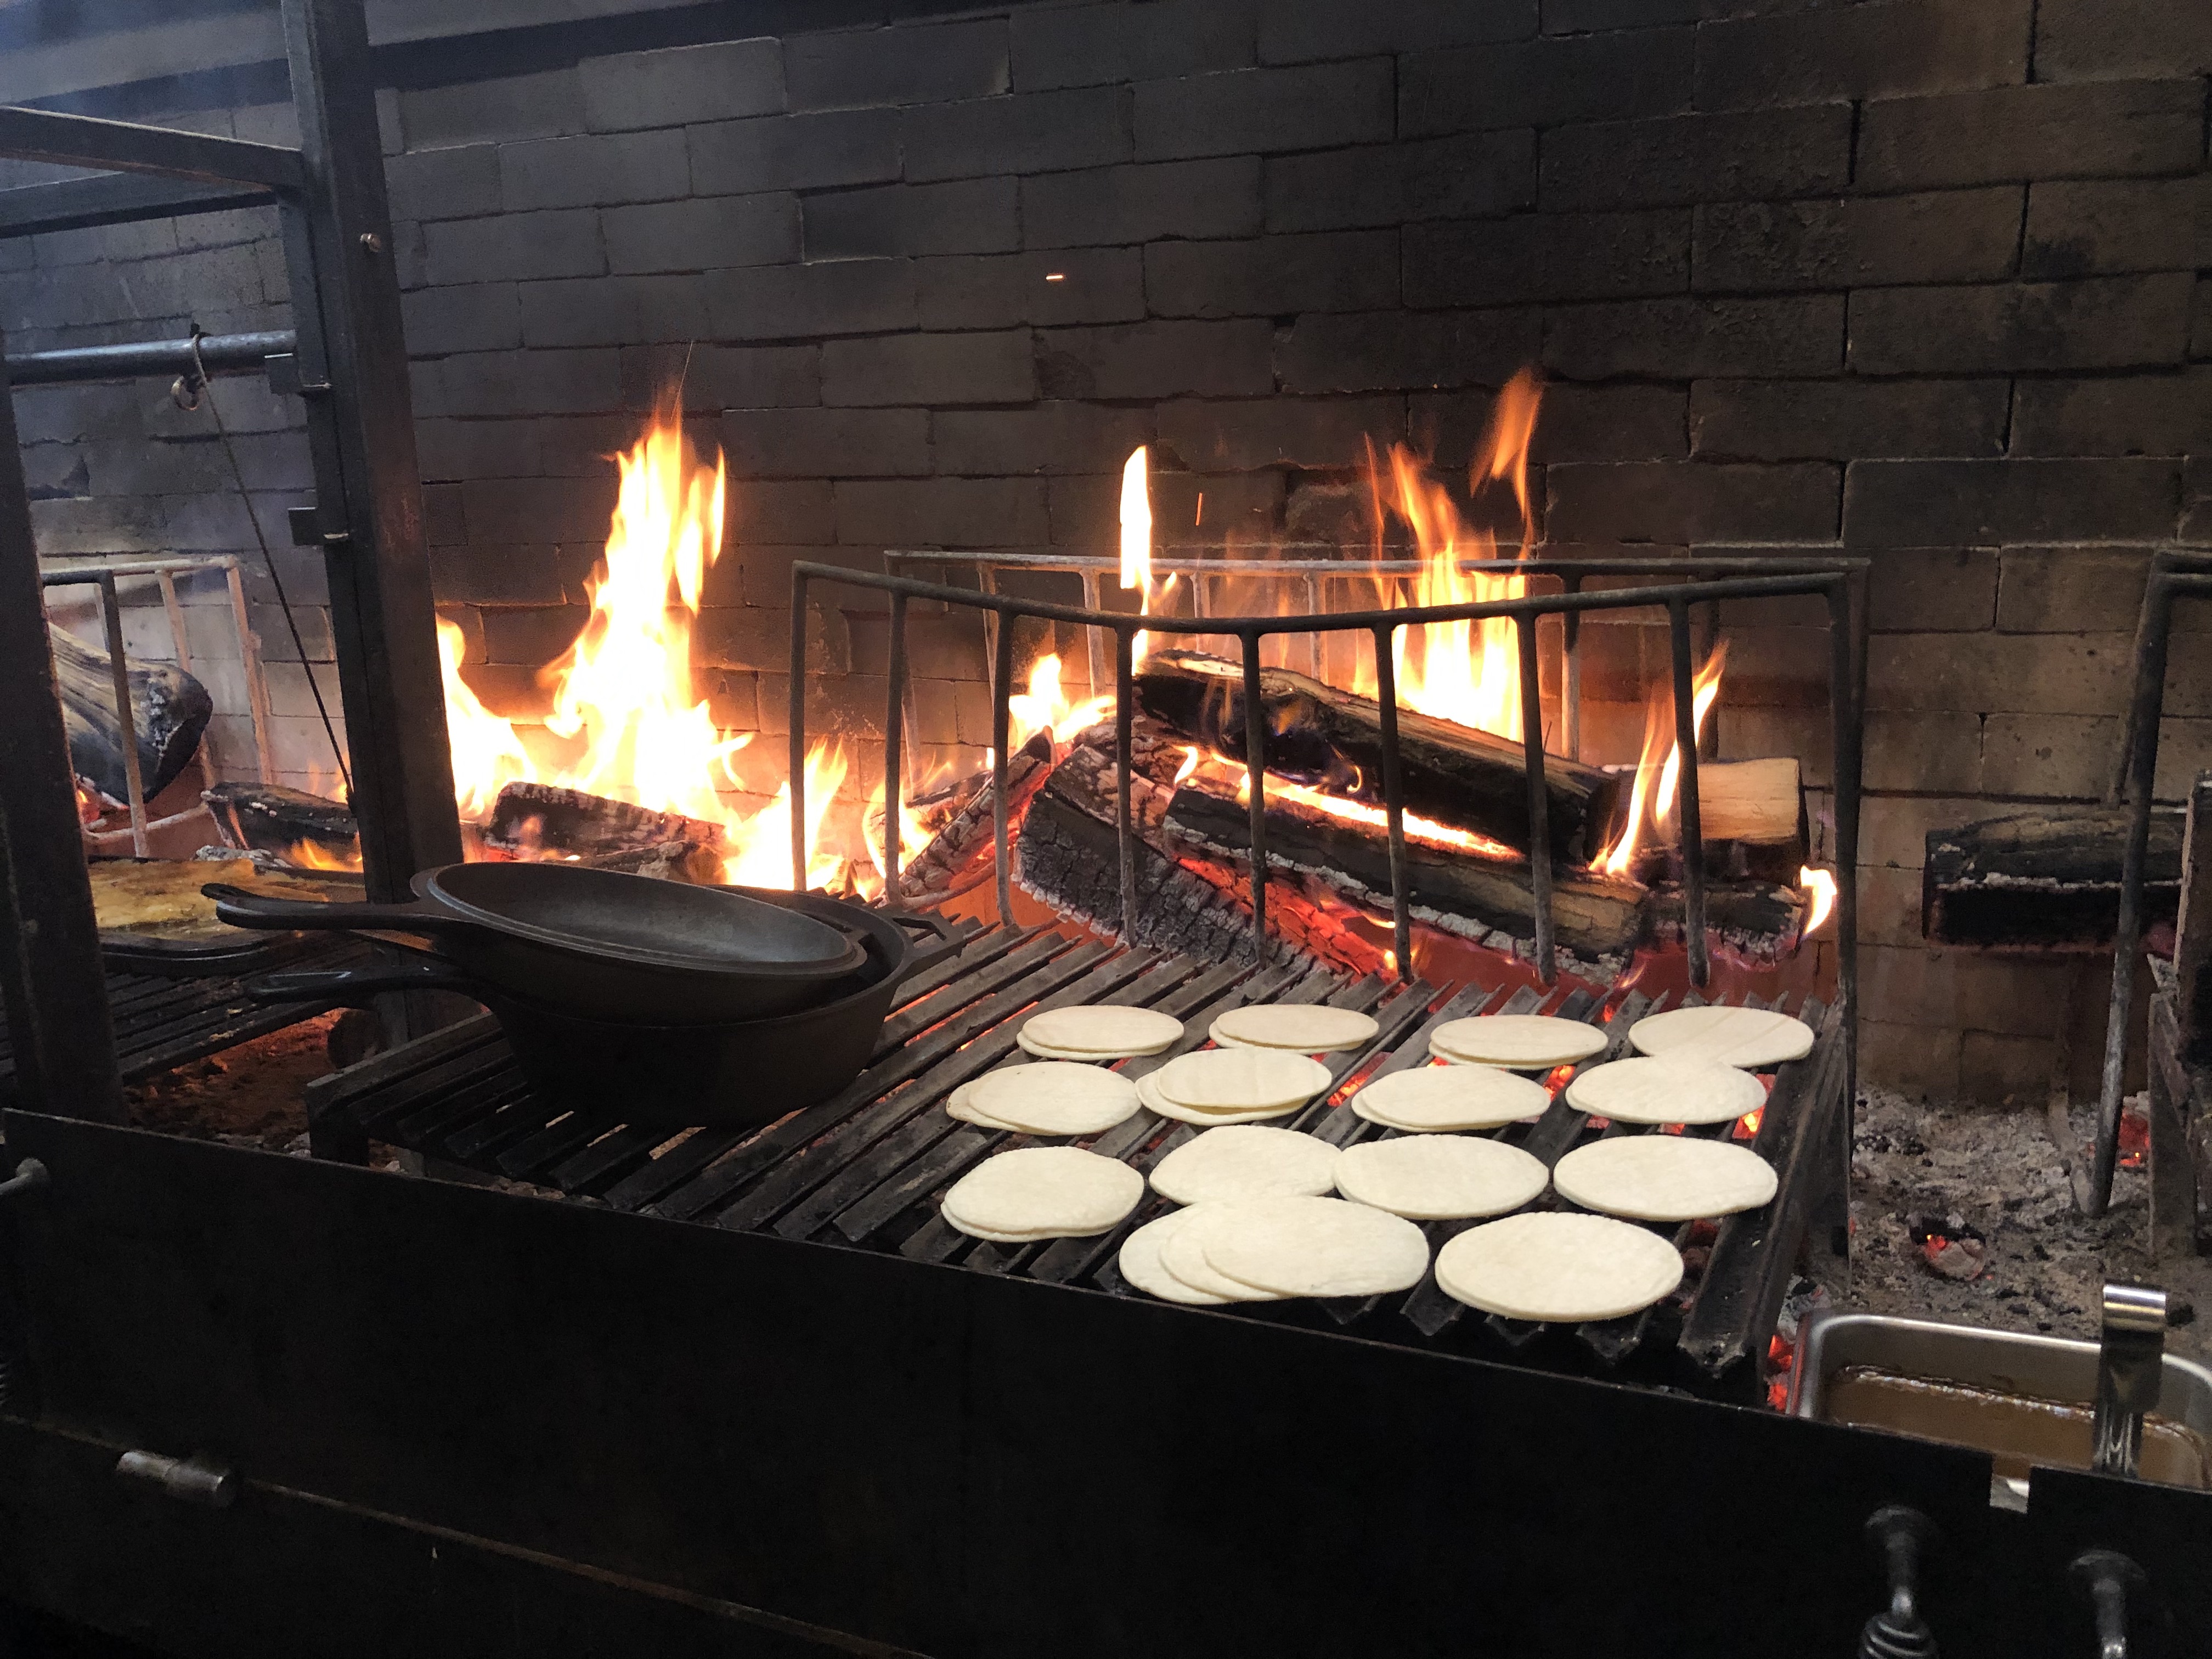 Flower tortillas on a grill grate over fire